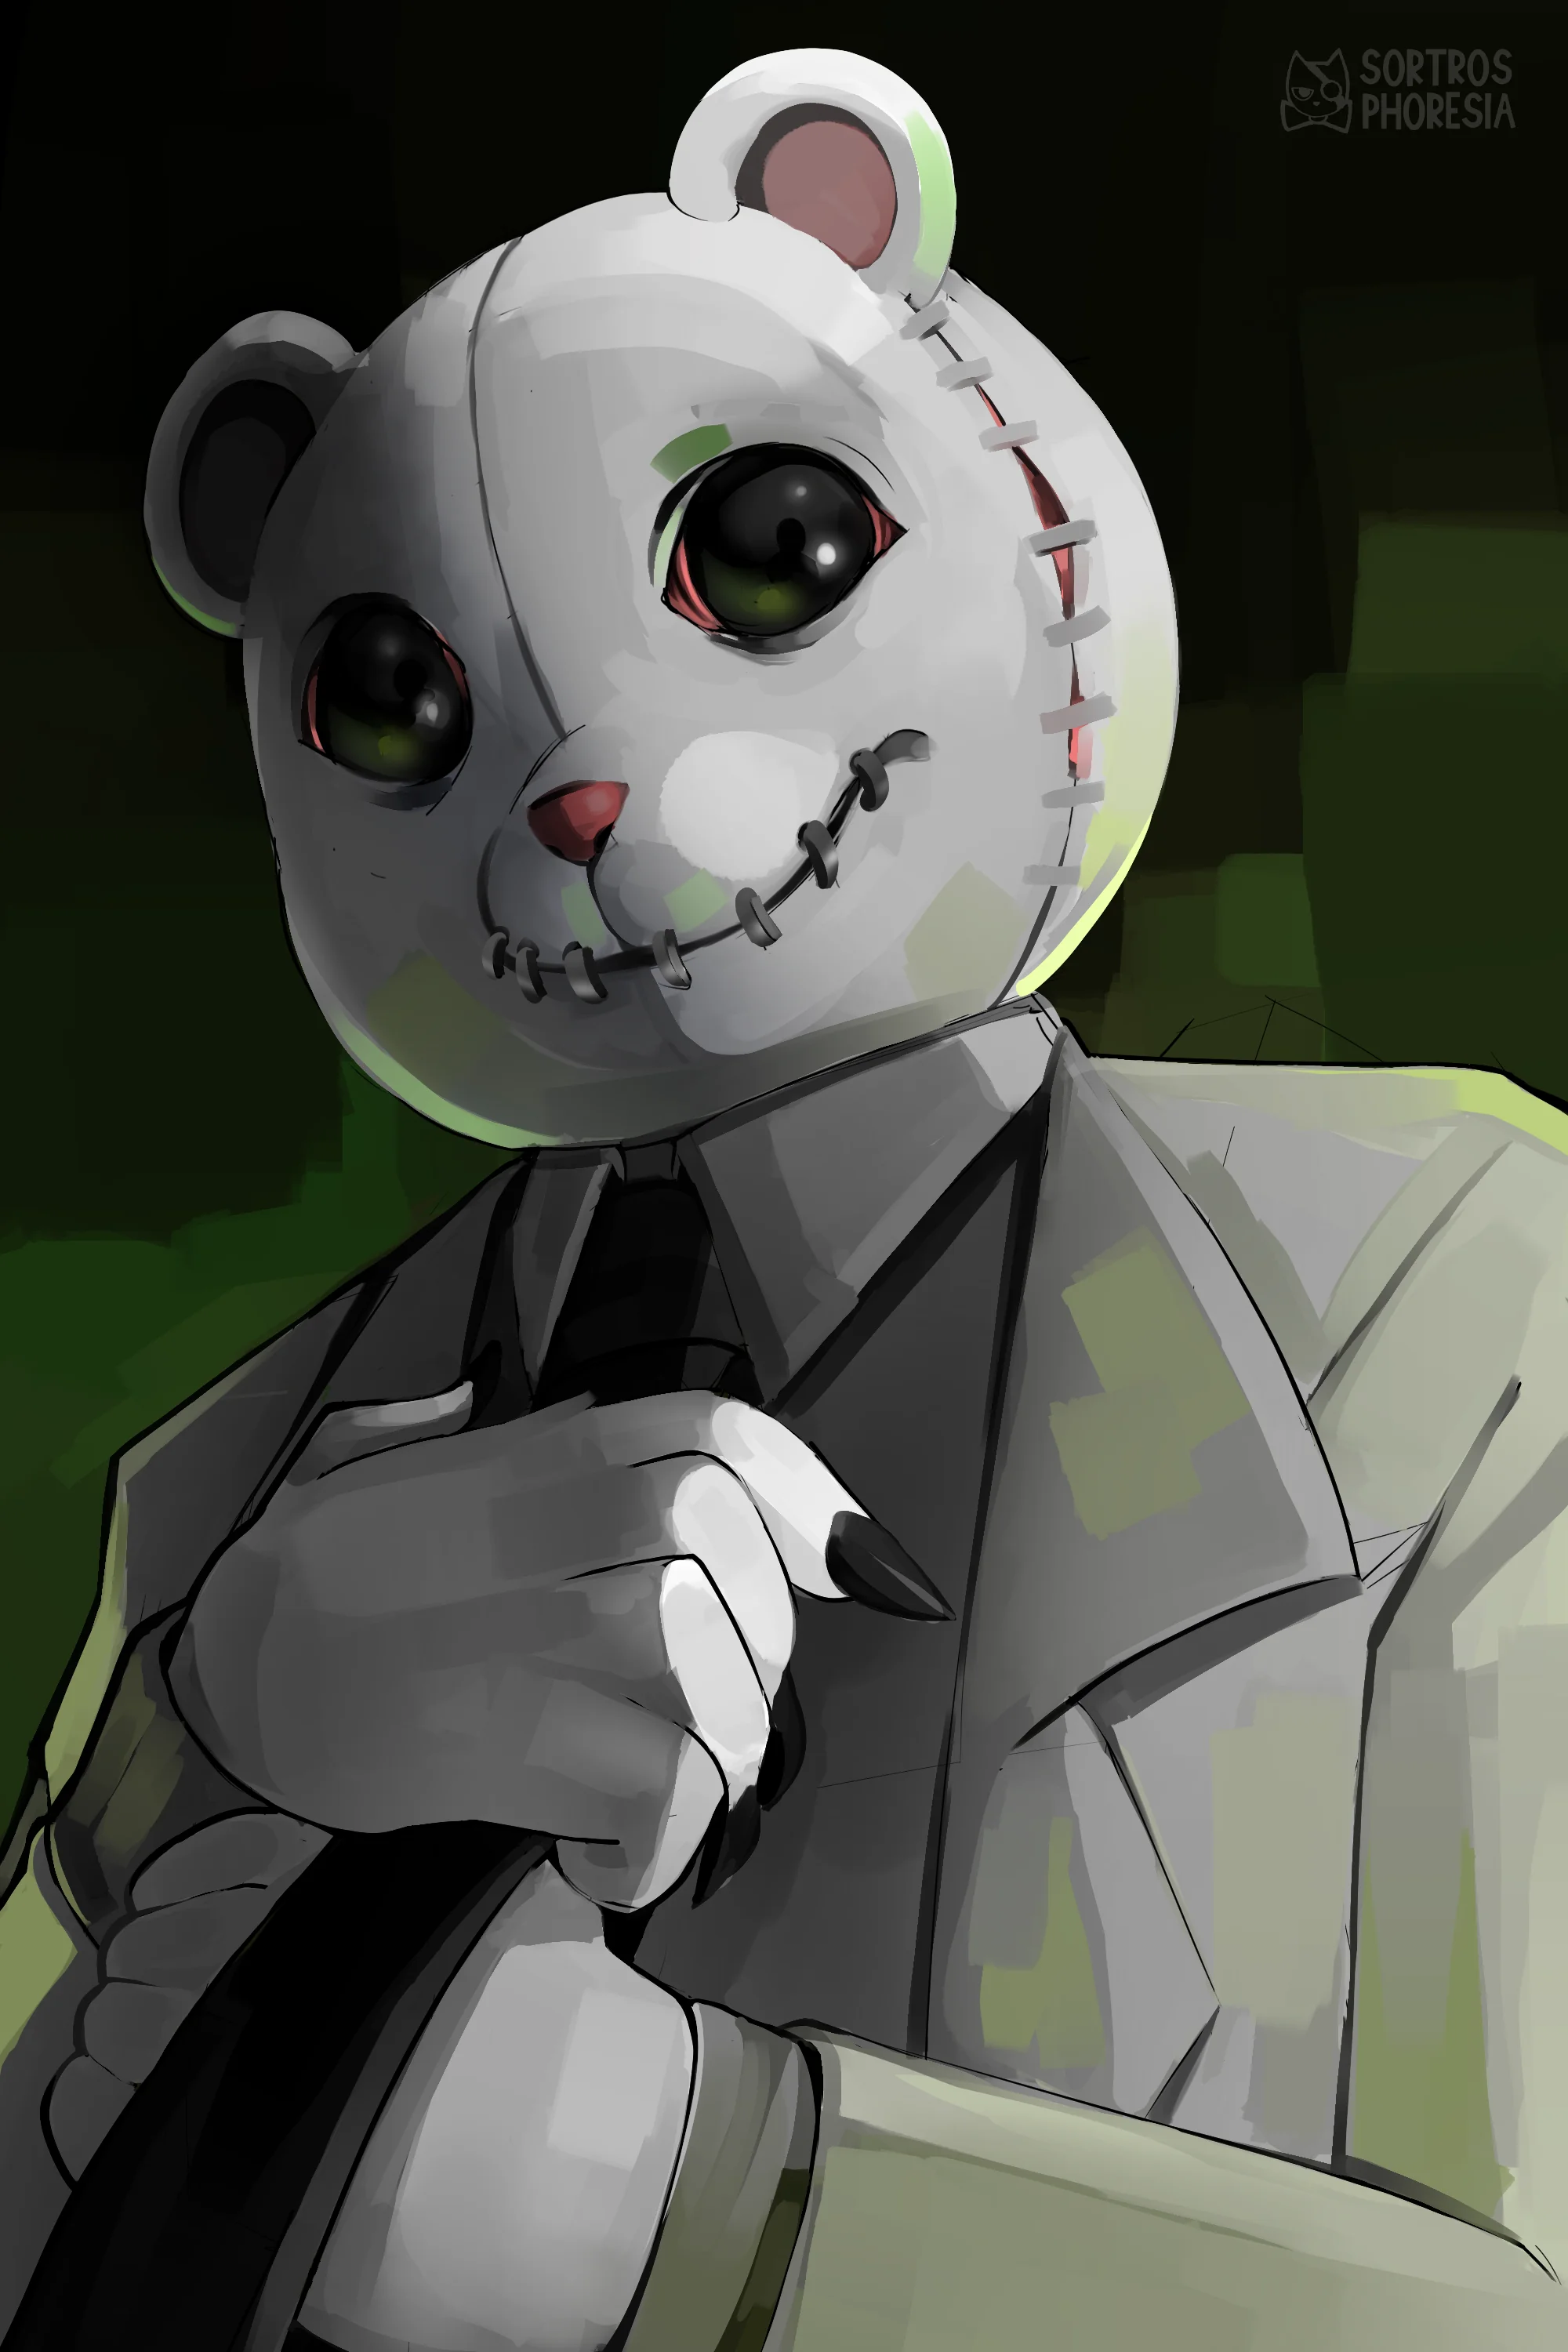 A drawing of Curucuho in a more realistic yet horrific depiction. He is still a polar bear with a white head and paws with claws, but his eyes are very large to the point it looks like a mascot's costume. His head is split down the side and stapled together, and his mouth is sewn shut. He still wears a classic white suit but also has a black tie.